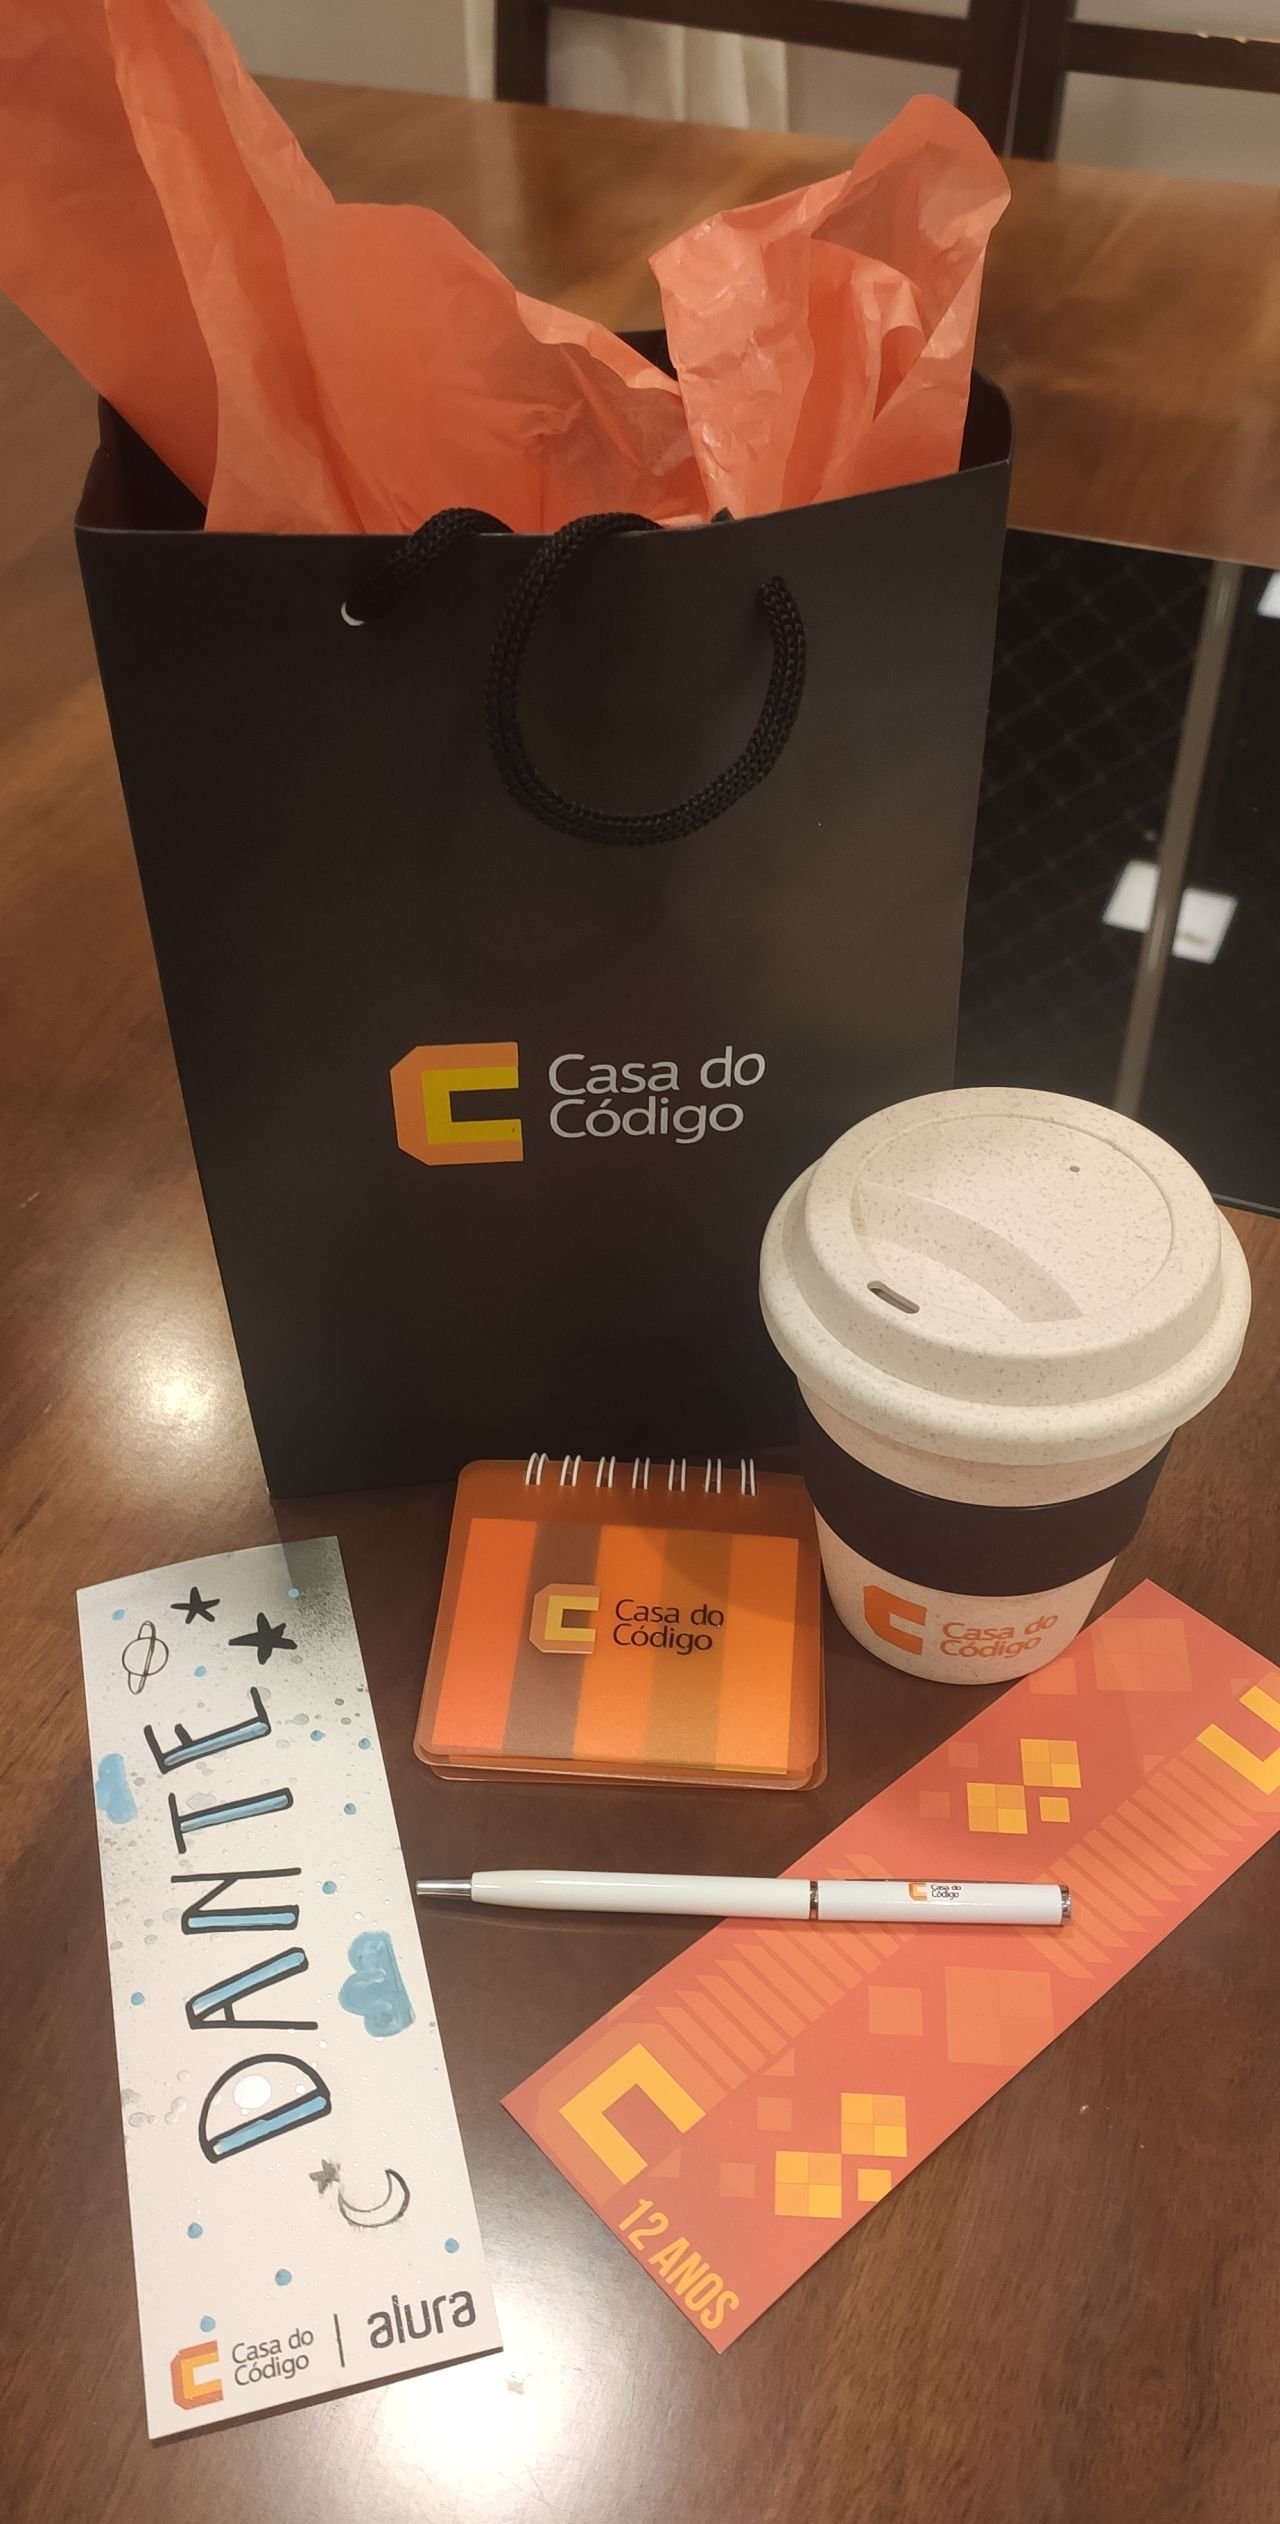 Bag, coffee cup, pad with post-its, pen and bookmark from Casa do Code; and another personalized bookmark (which says "Dante")